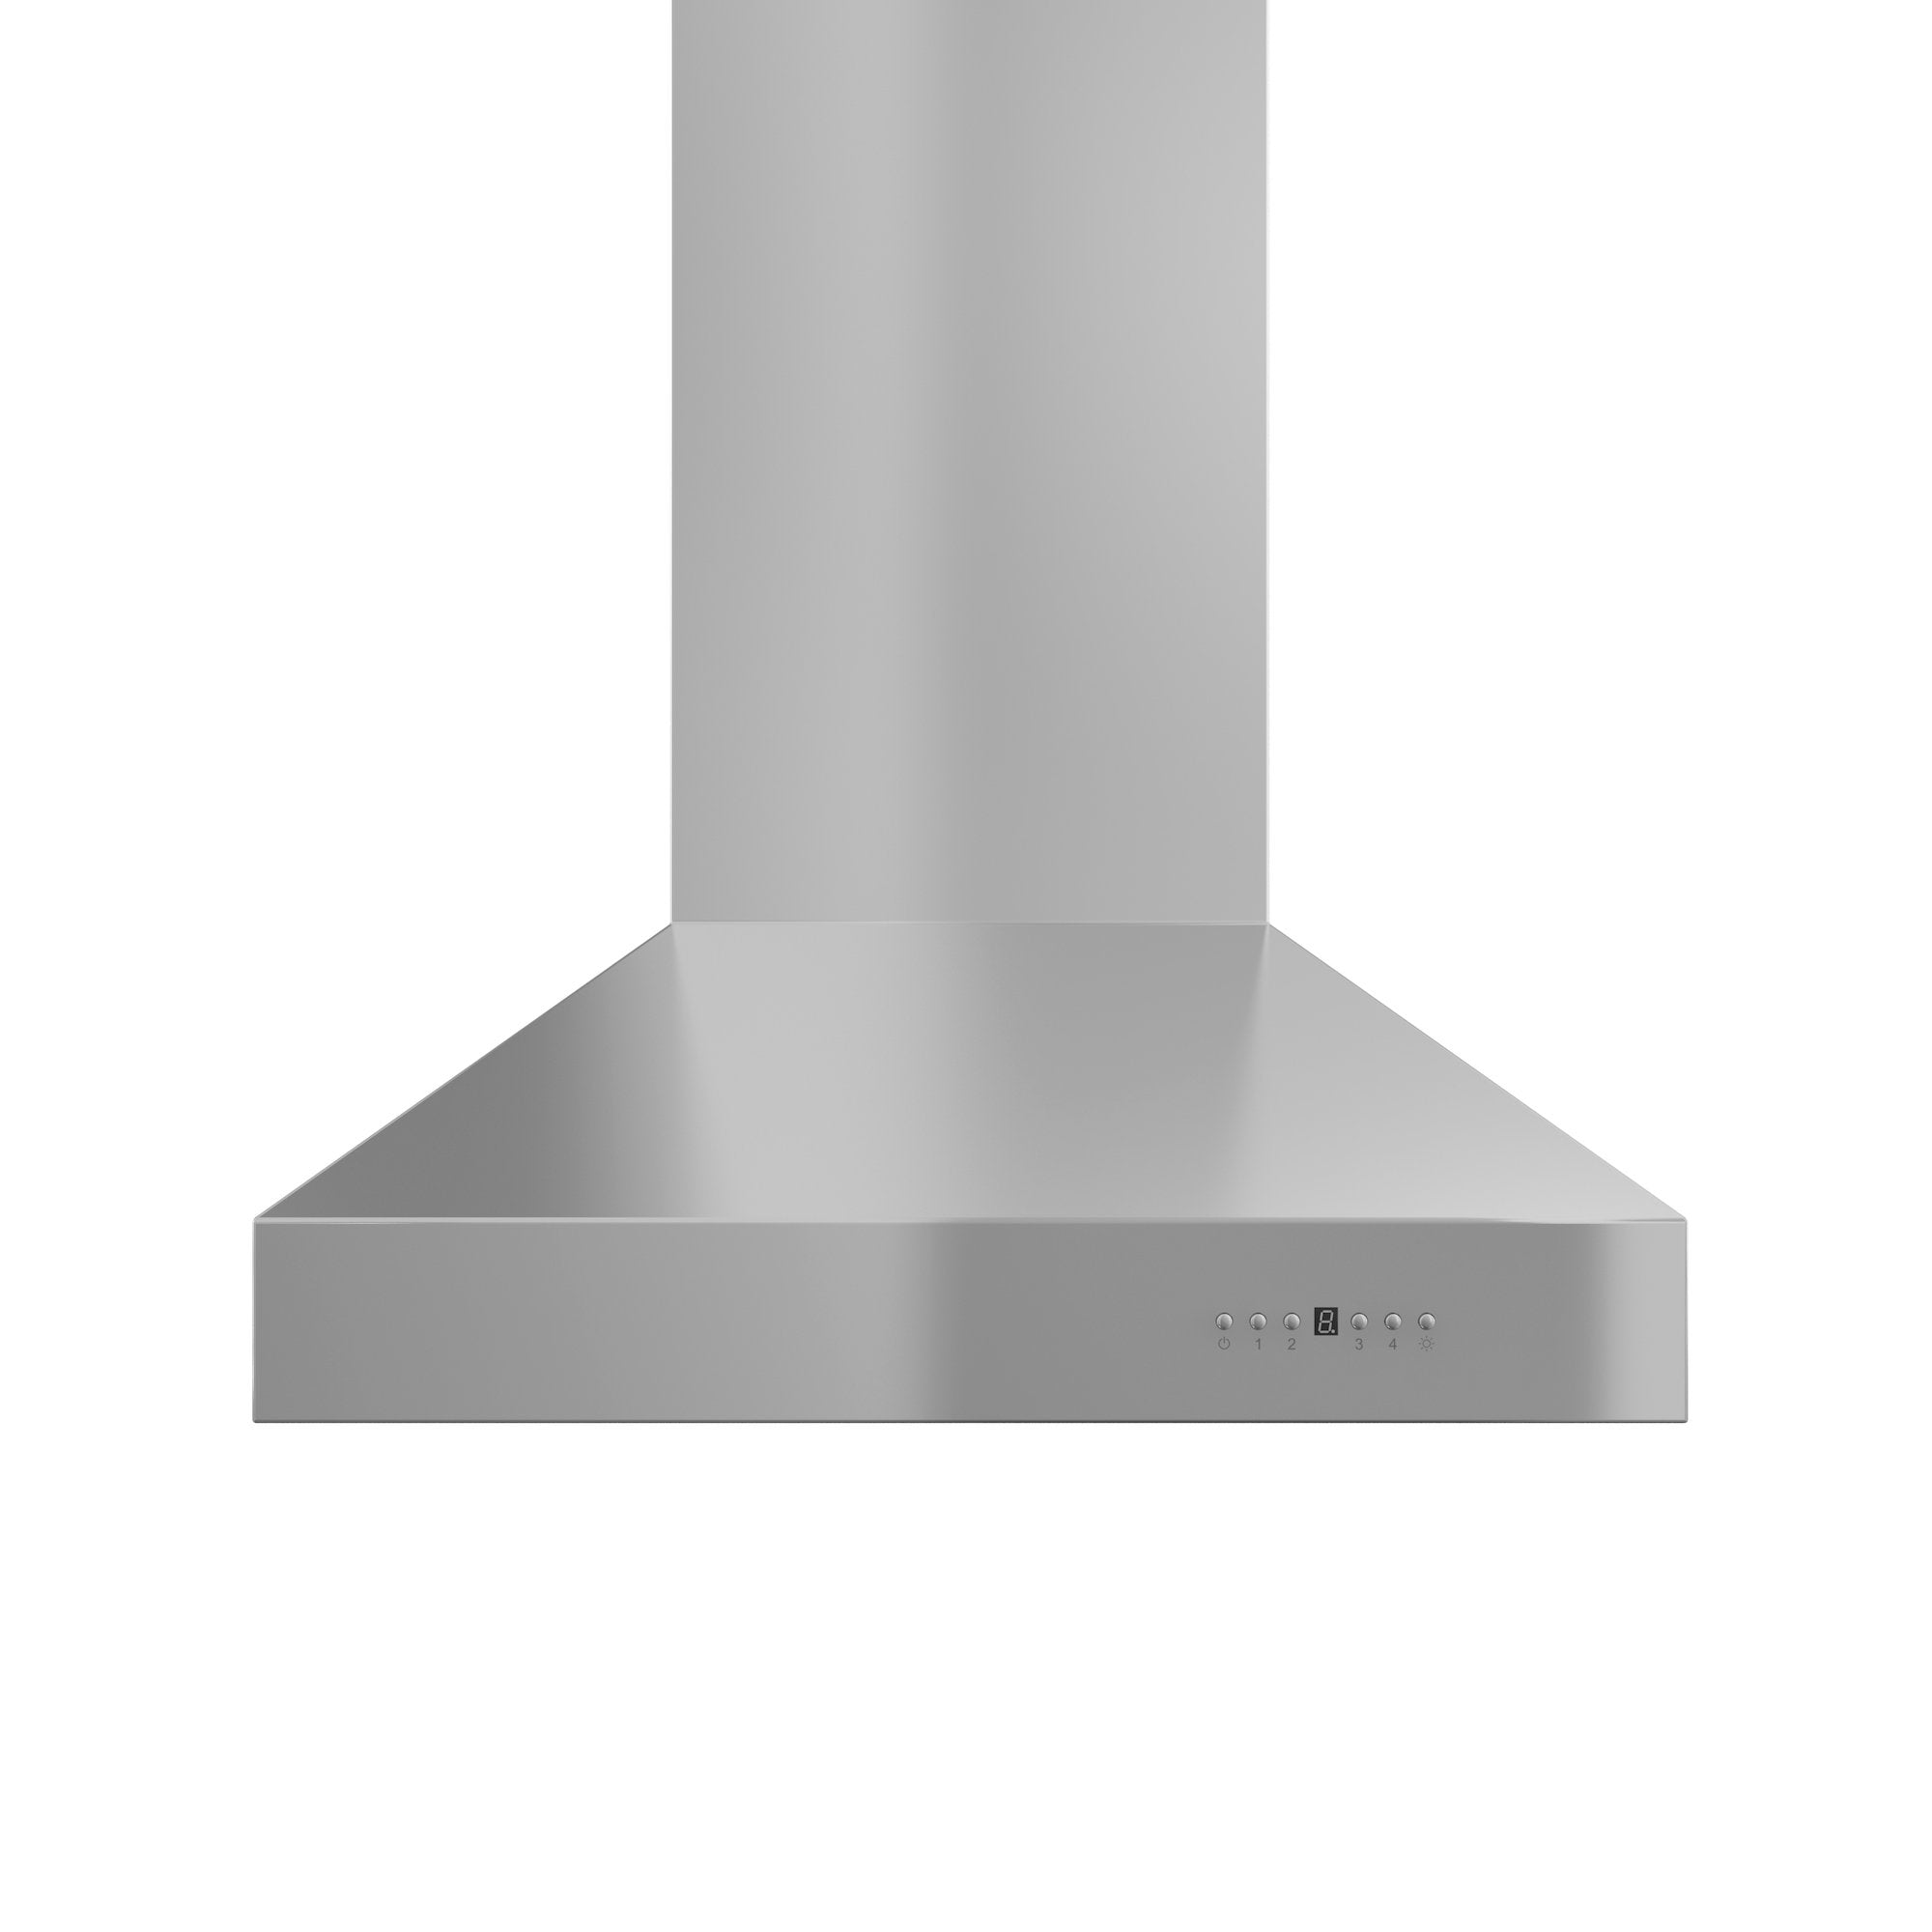 ZLINE Professional Convertible Vent Wall Mount Range Hood in Stainless Steel - 697